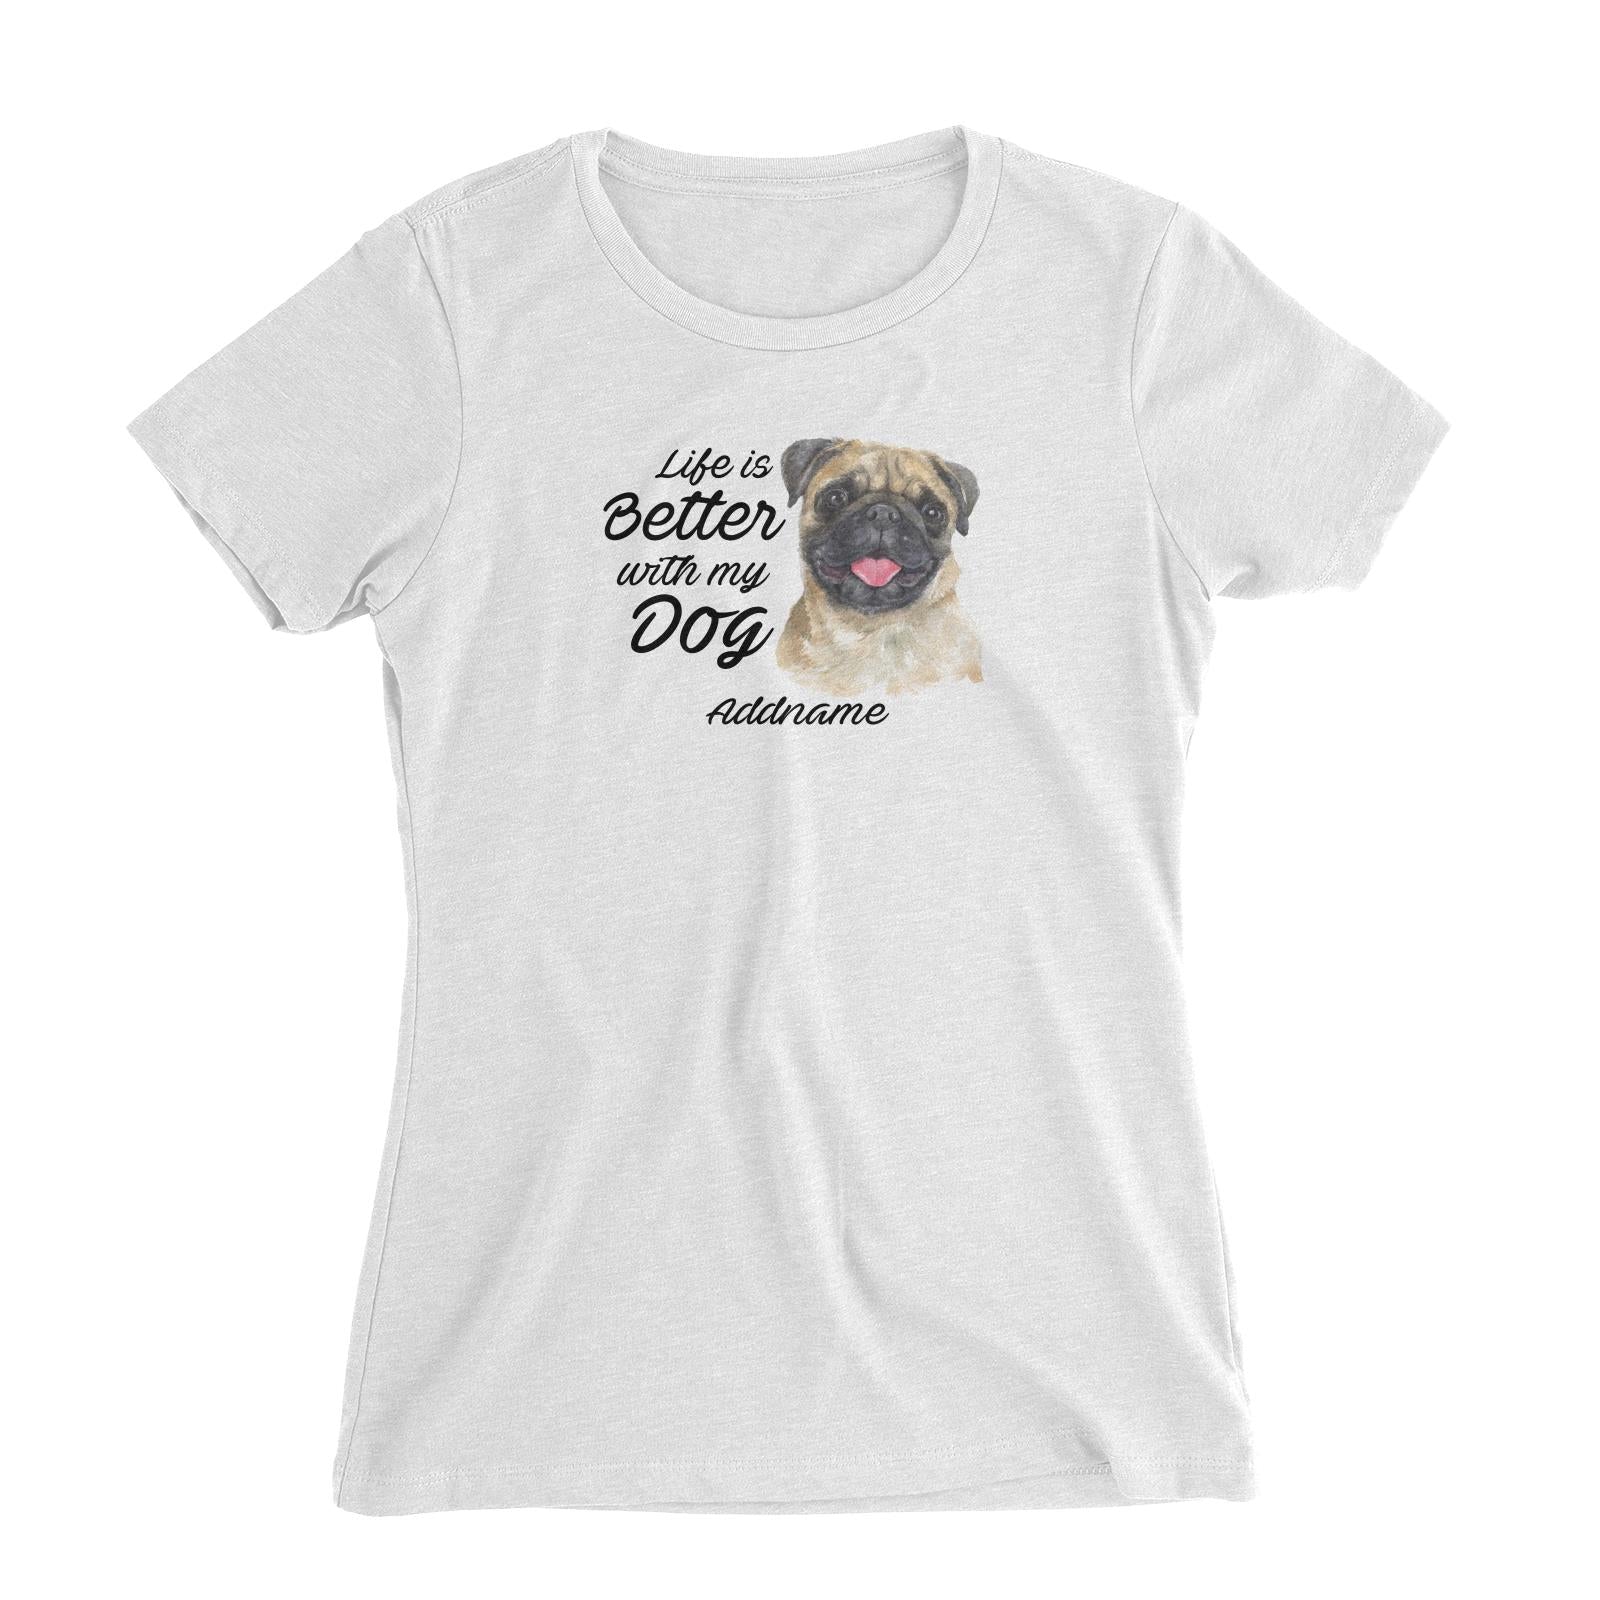 Watercolor Life is Better With My Dog Pug Addname Women's Slim Fit T-Shirt